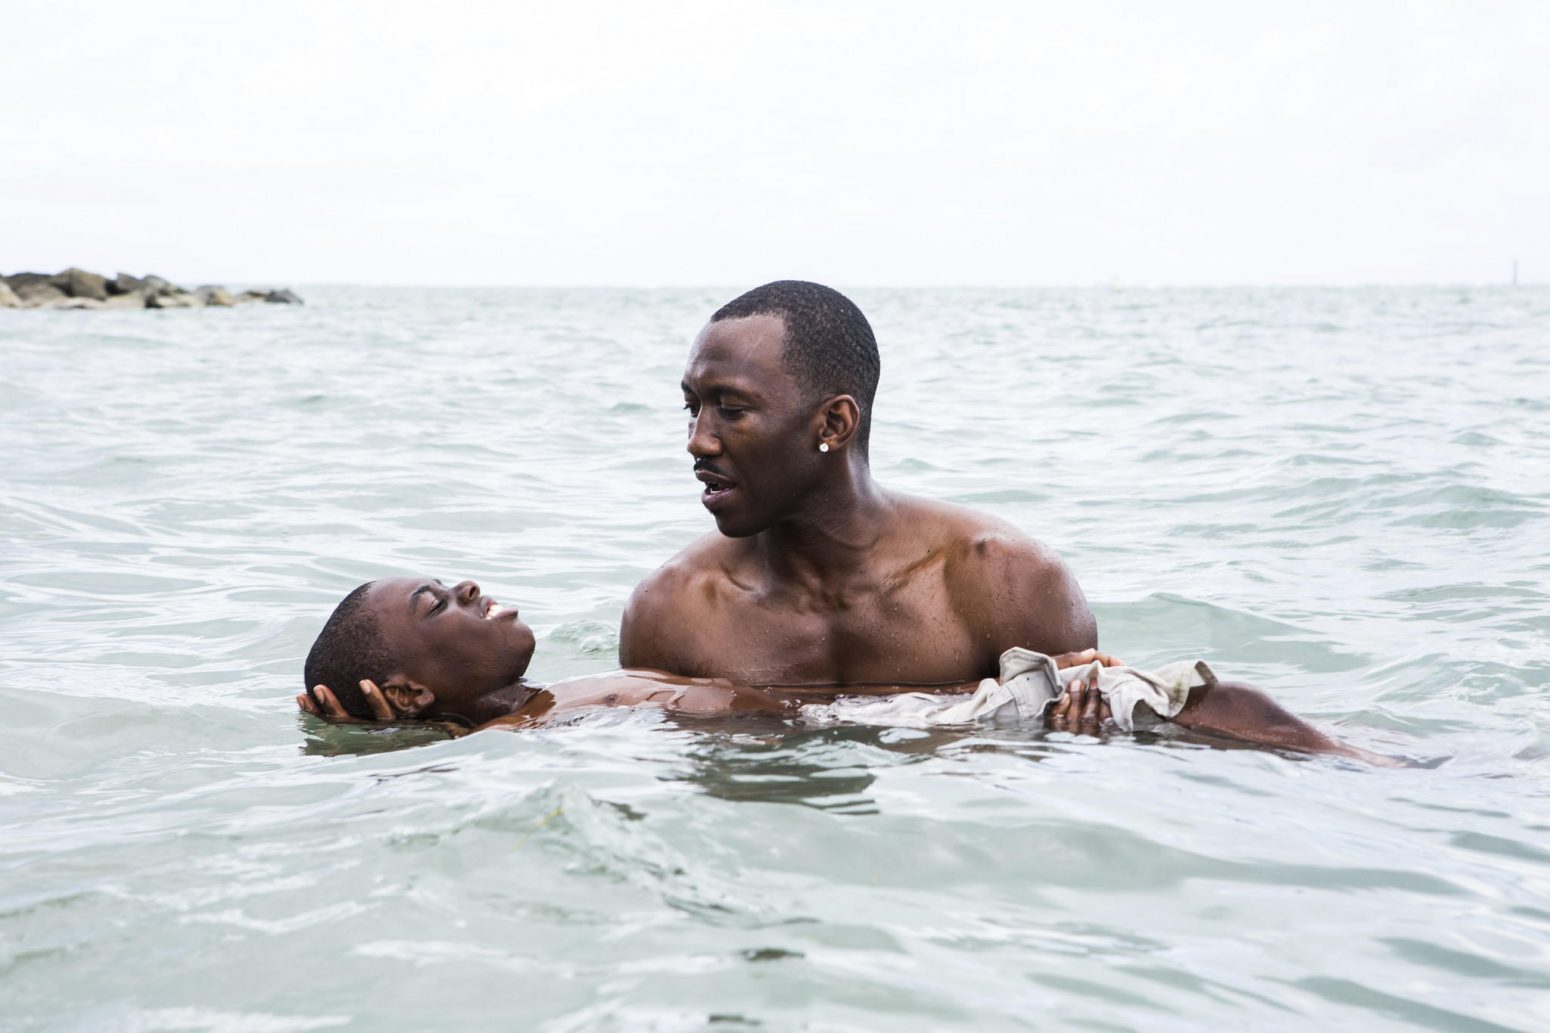 Oscar snafu: Moonlight wins 'Best Picture' after La La Land was incorrectly named